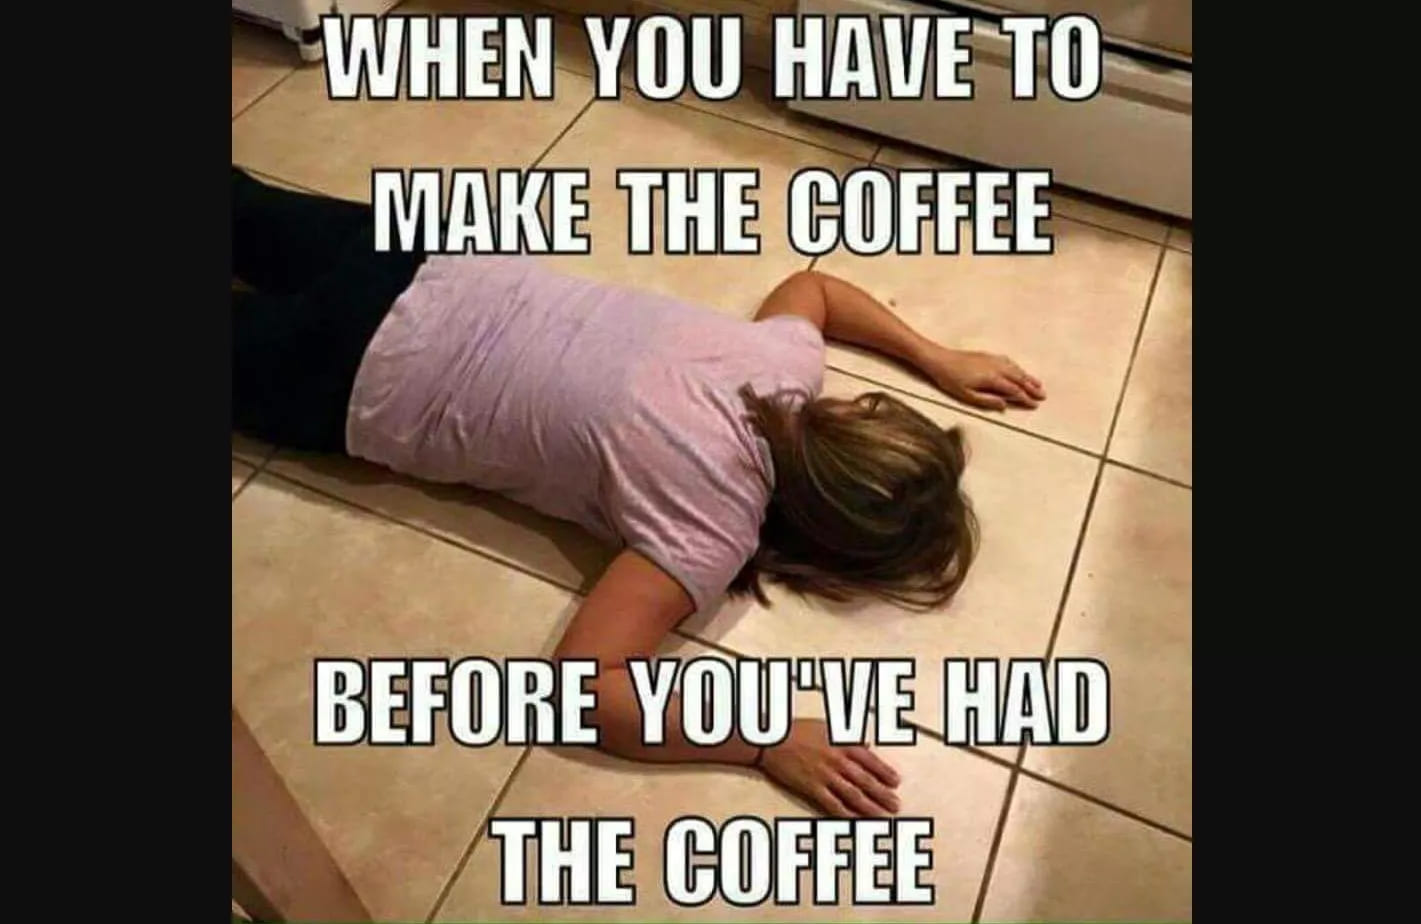 before your coffee meme, funny before having coffee meme, before having your coffee meme